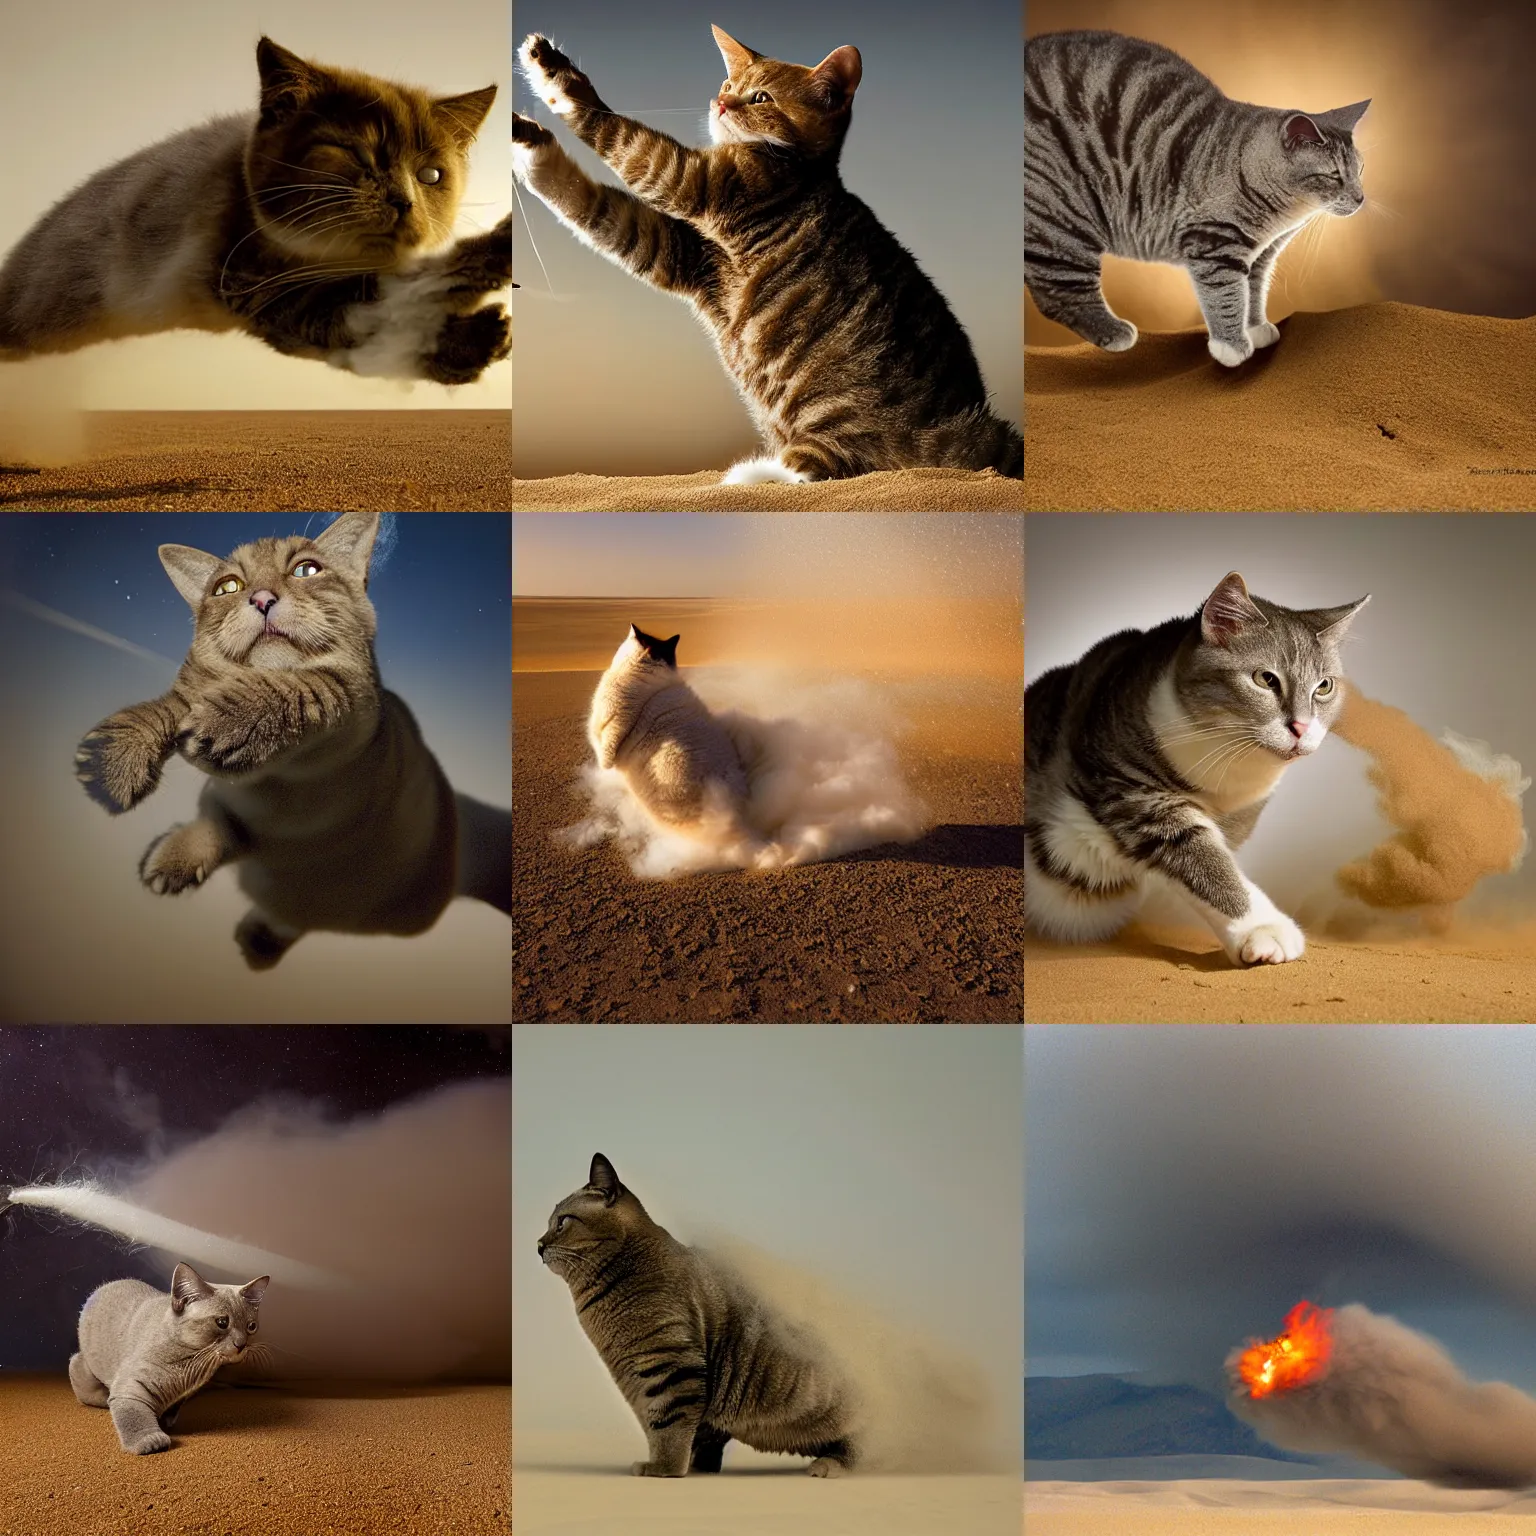 Prompt: award winning wildlife photography, a fat house cat, midair, launching towards the camera at high speeds breaking the sound barrier, spaceship propulsion, huge flame exhaust behind cat, surrounded by rocket launch smoke, space rocket smoke, high shutter speed, dust and sand in the air, wildlife photography by Paul Nicklen, shot by Joel Sartore, Skye Meaker, national geographic, perfect lighting, blurry background, bokeh